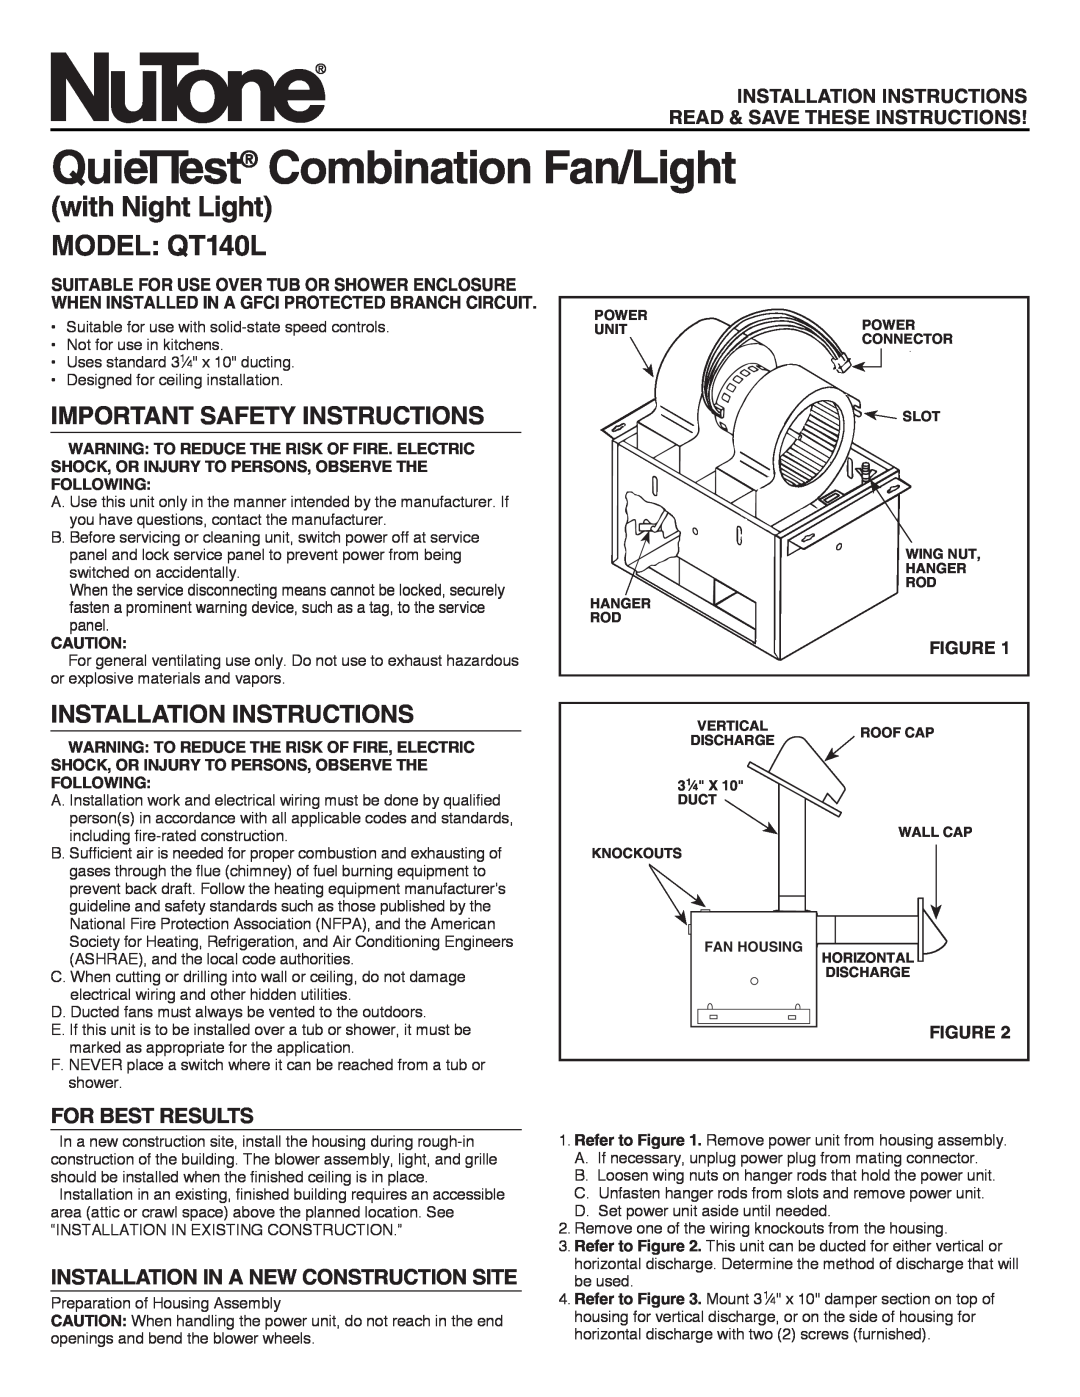 NuTone installation instructions QuieTTest Combination Fan/Light, with Night Light MODEL QT140L, For Best Results 